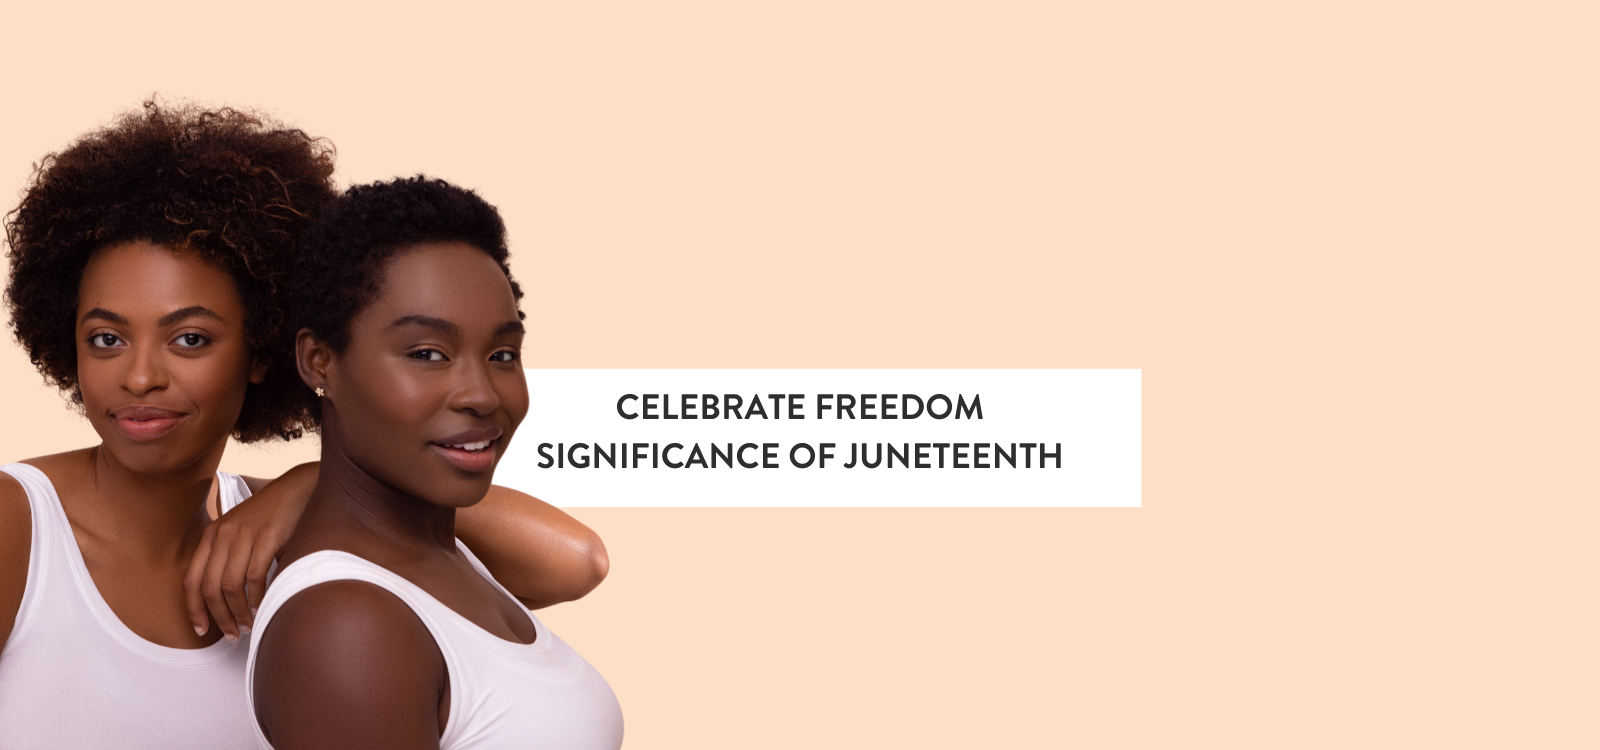 The Significance of Juneteenth